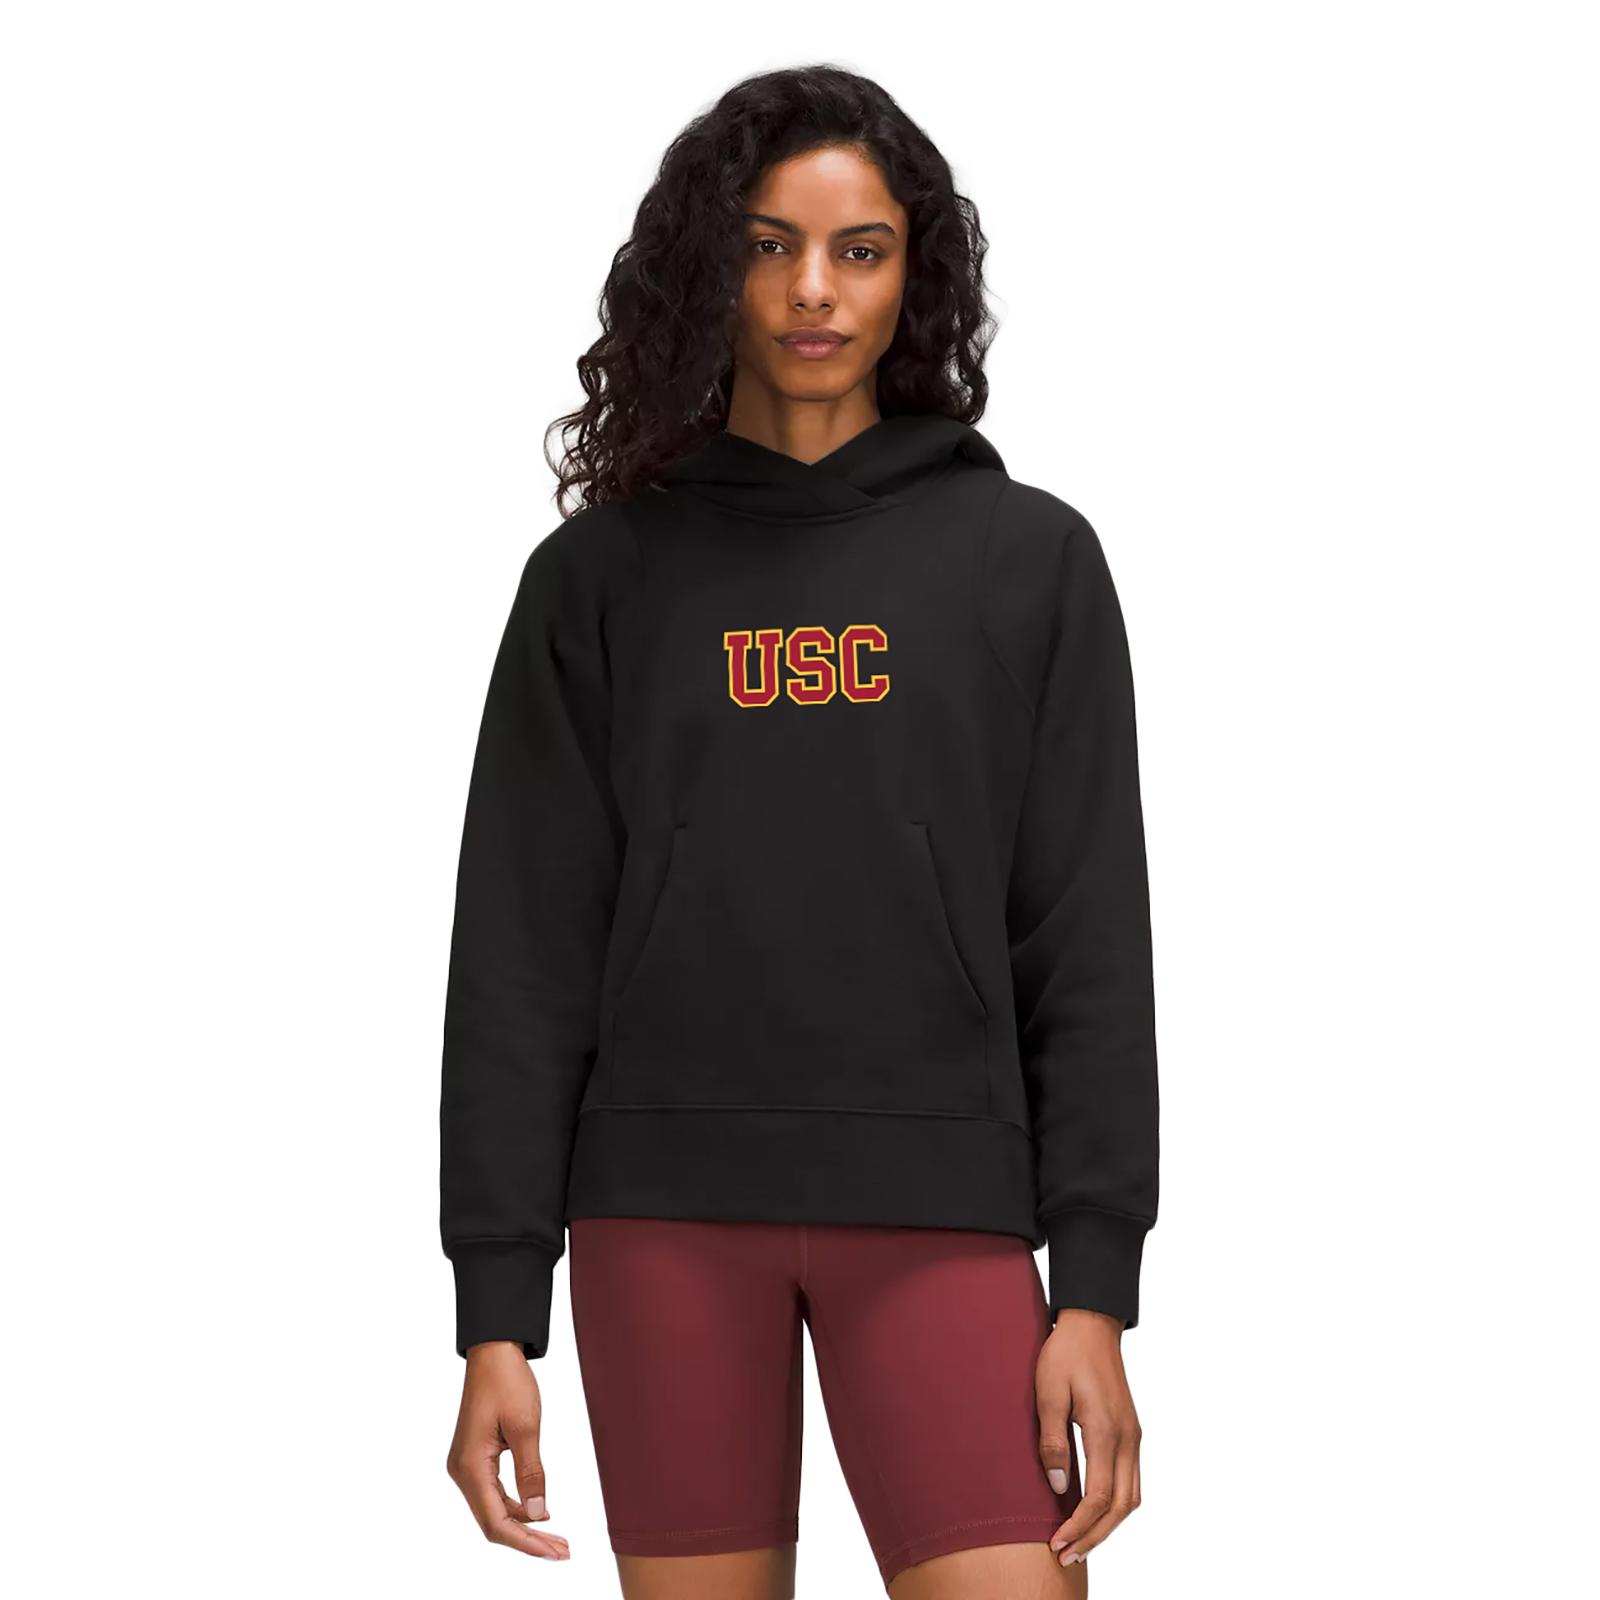 USC Womens Loungeful Pullover Hoodie image01